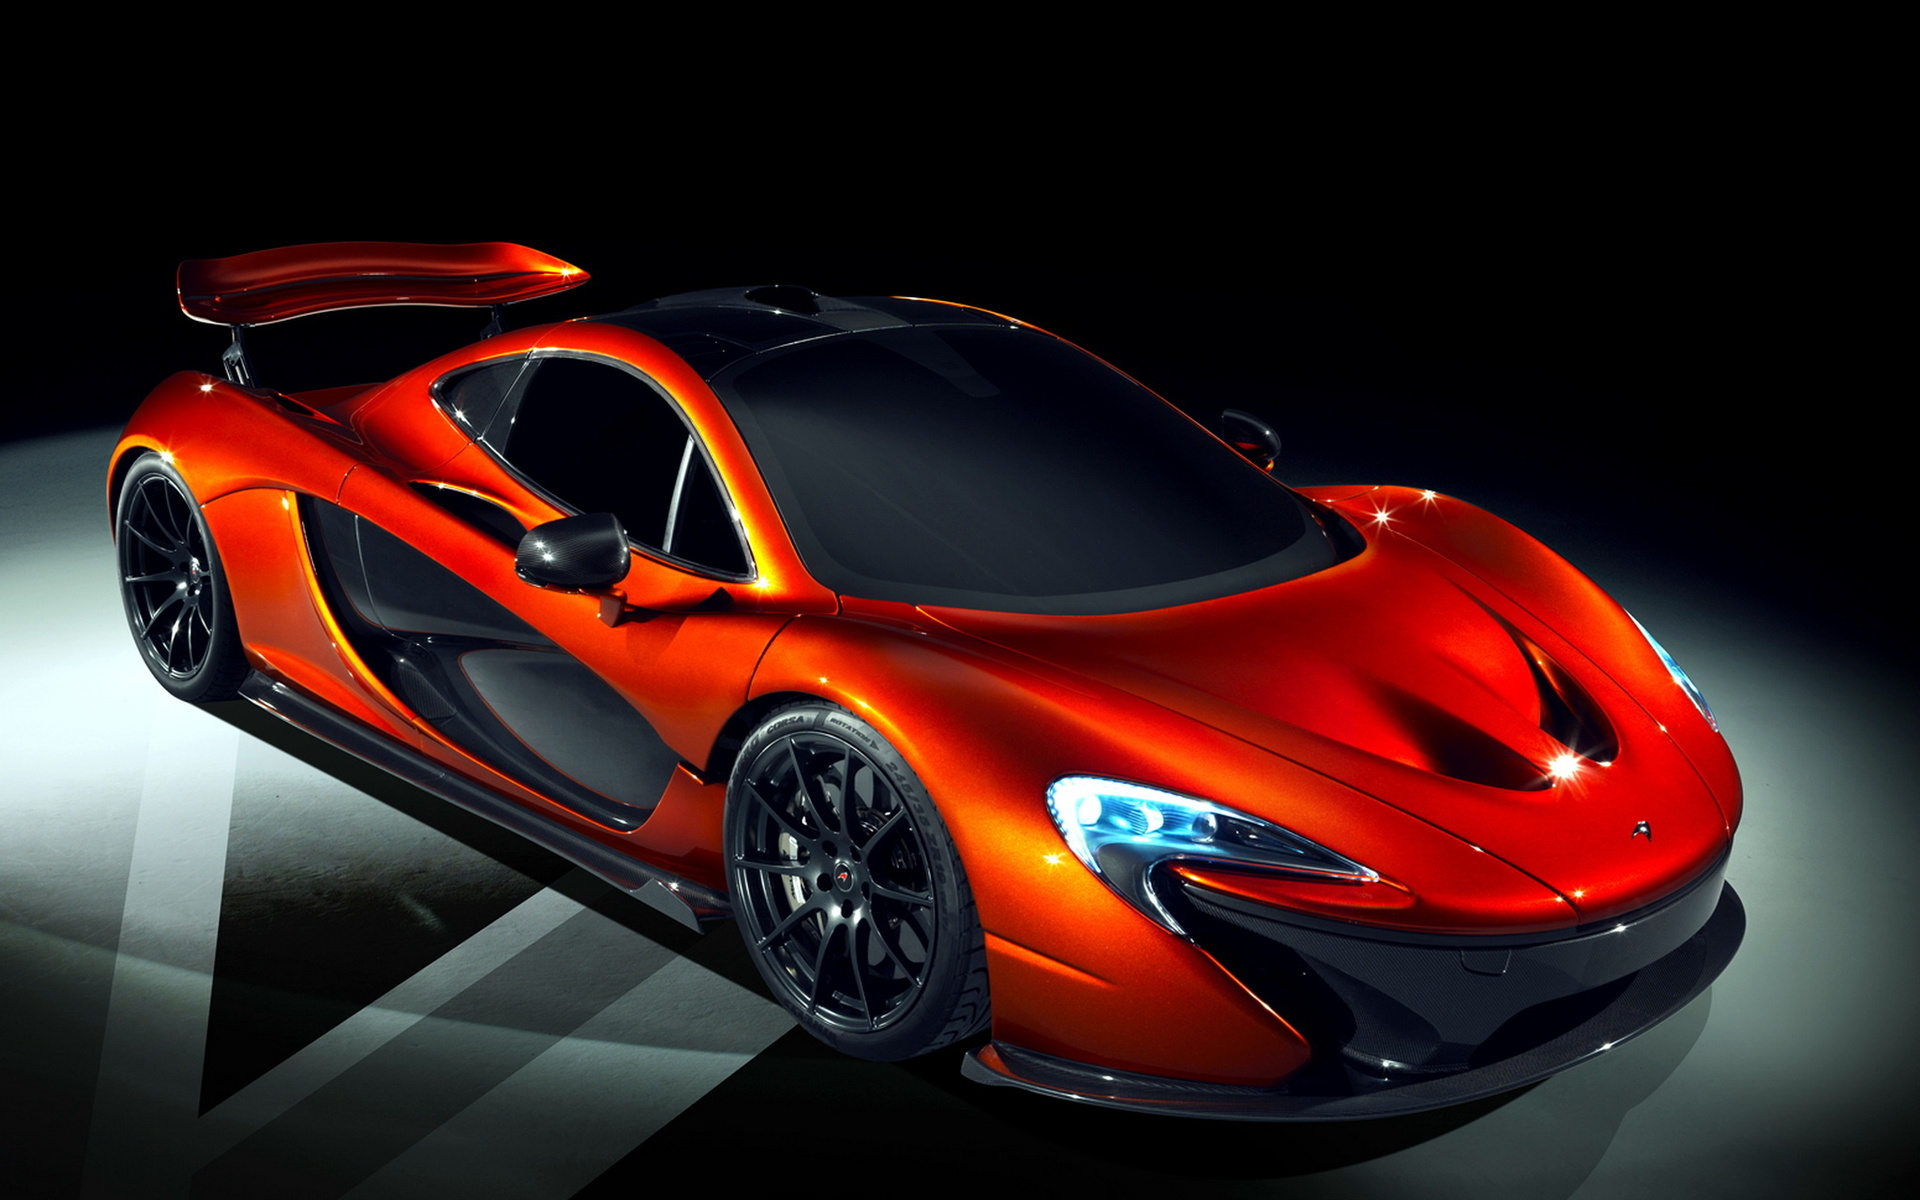 mclaren, Vehicles, Cars, Auto, Supercar, Exotic, Wings, Red, Color, Contrast, Shadow, Light, Candy Wallpaper